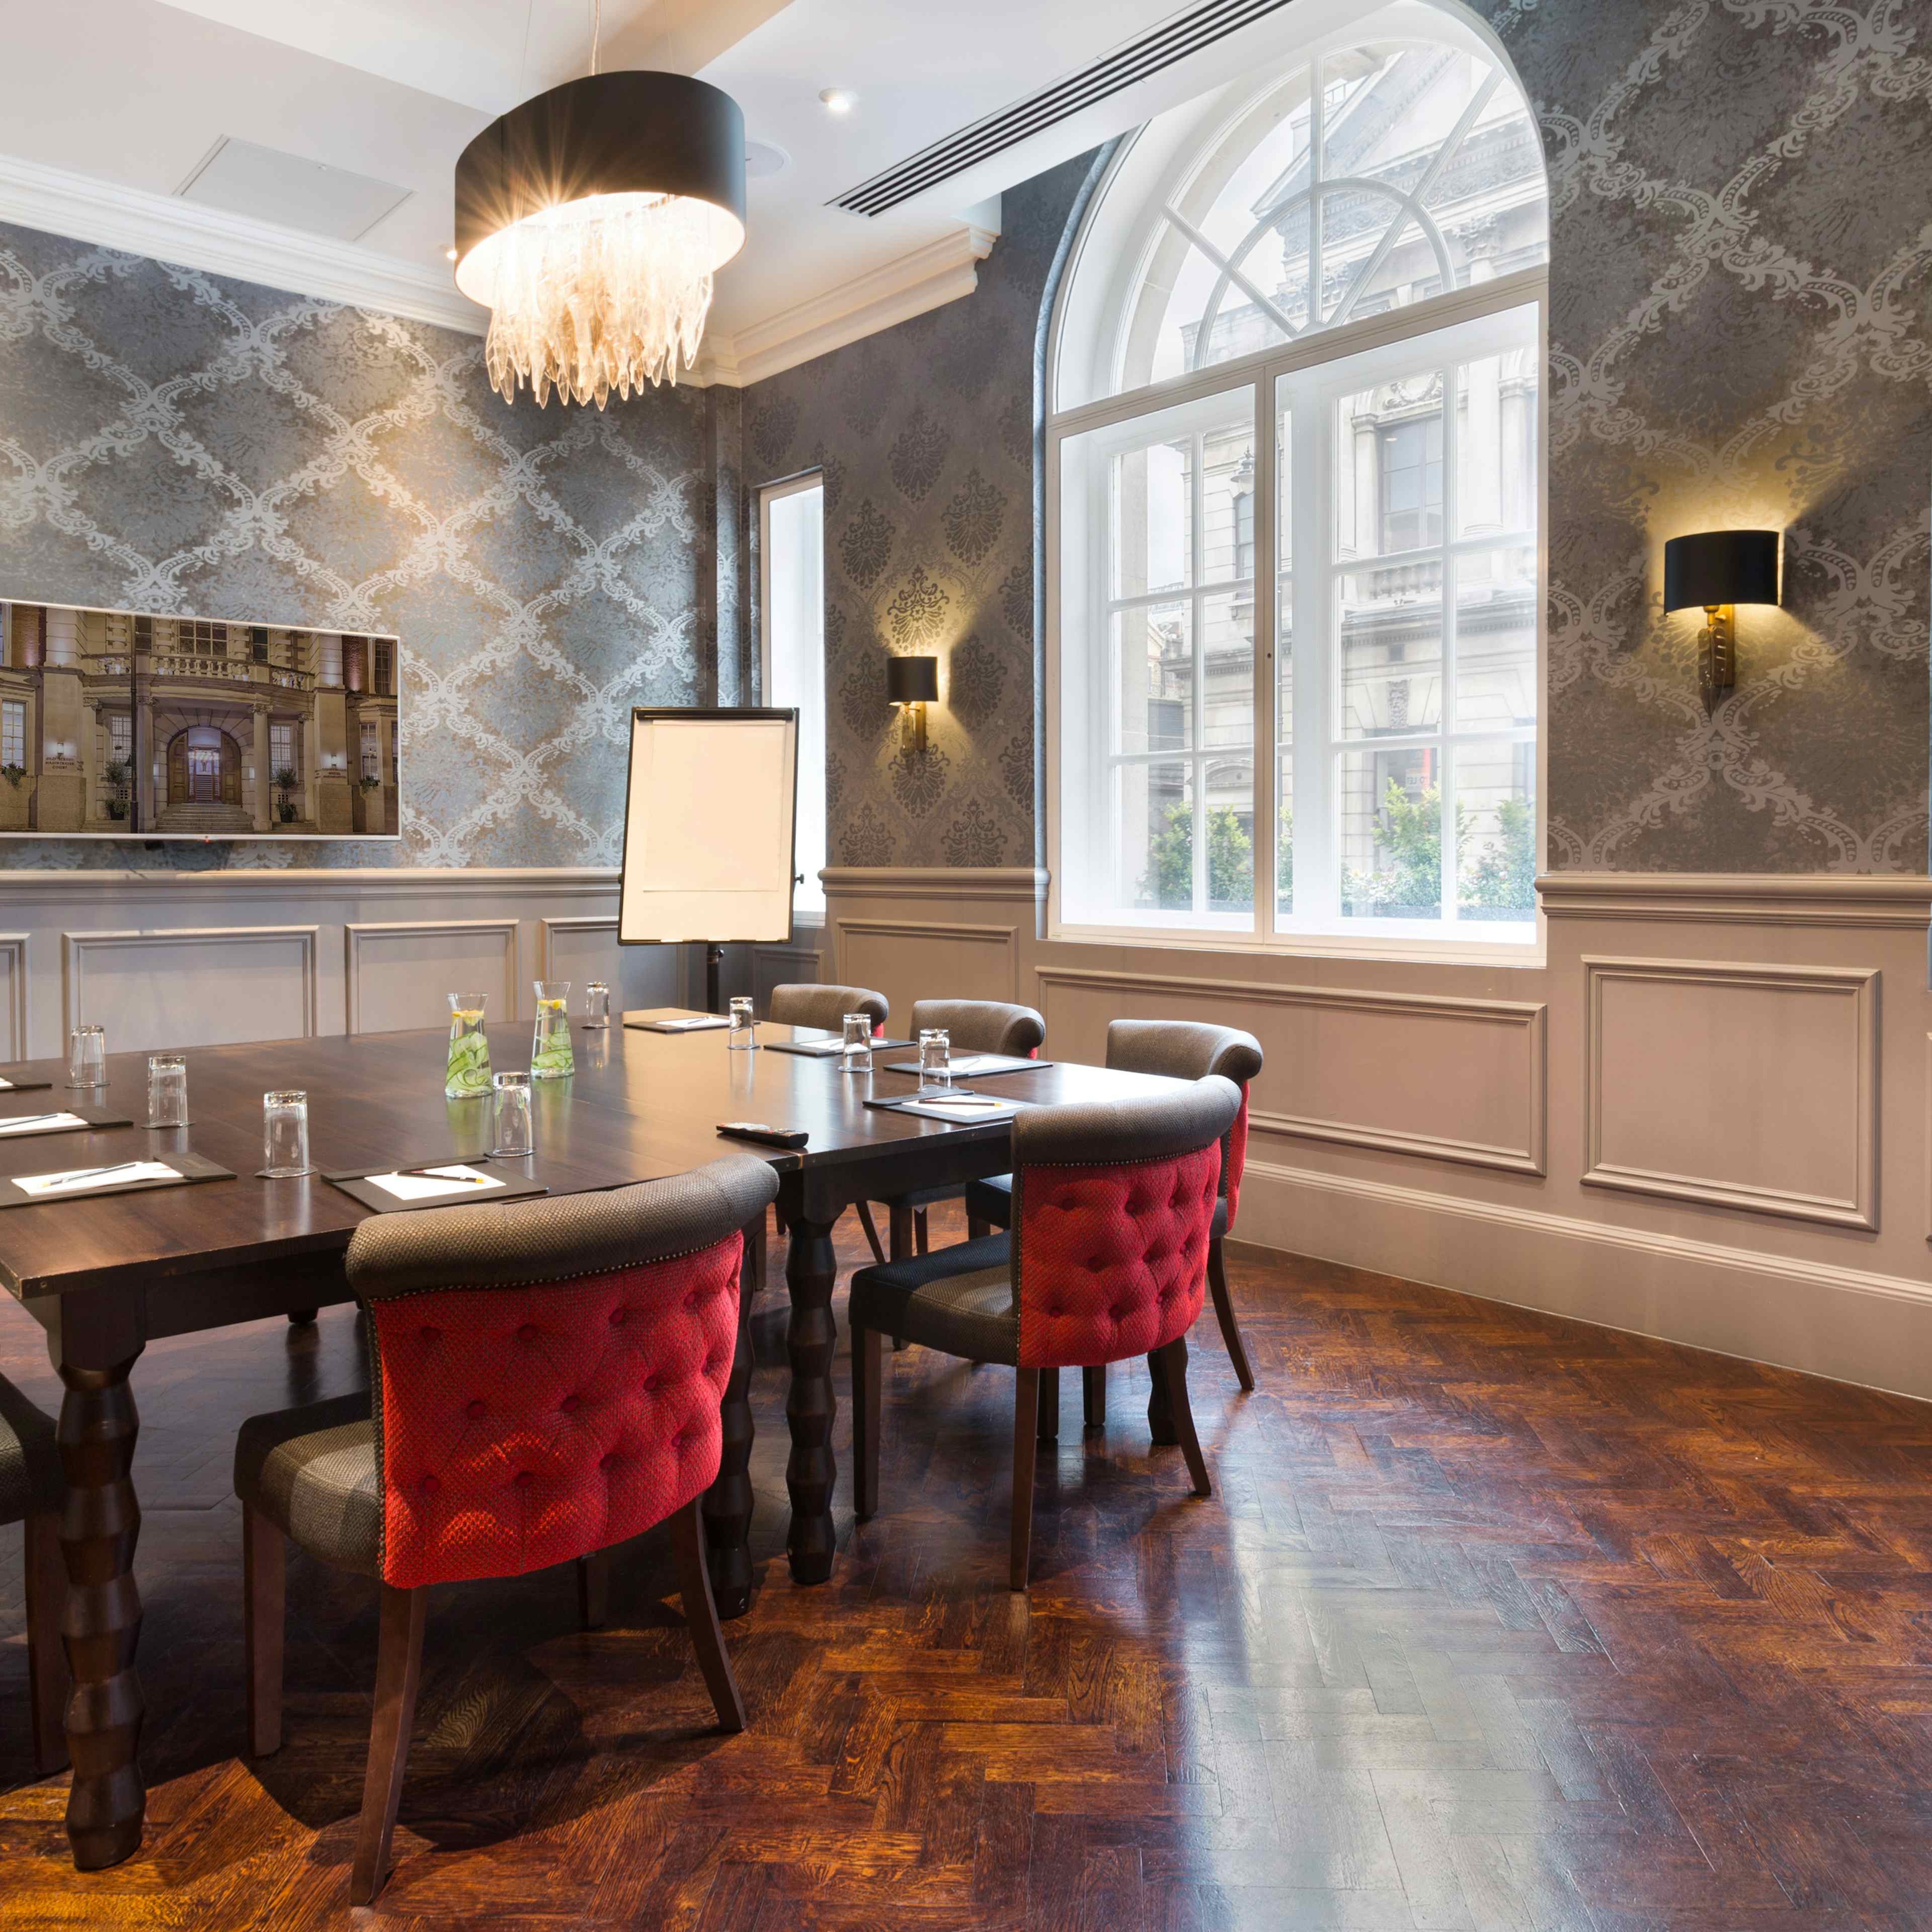 Courthouse Hotel Shoreditch - Private Dining Room image 1